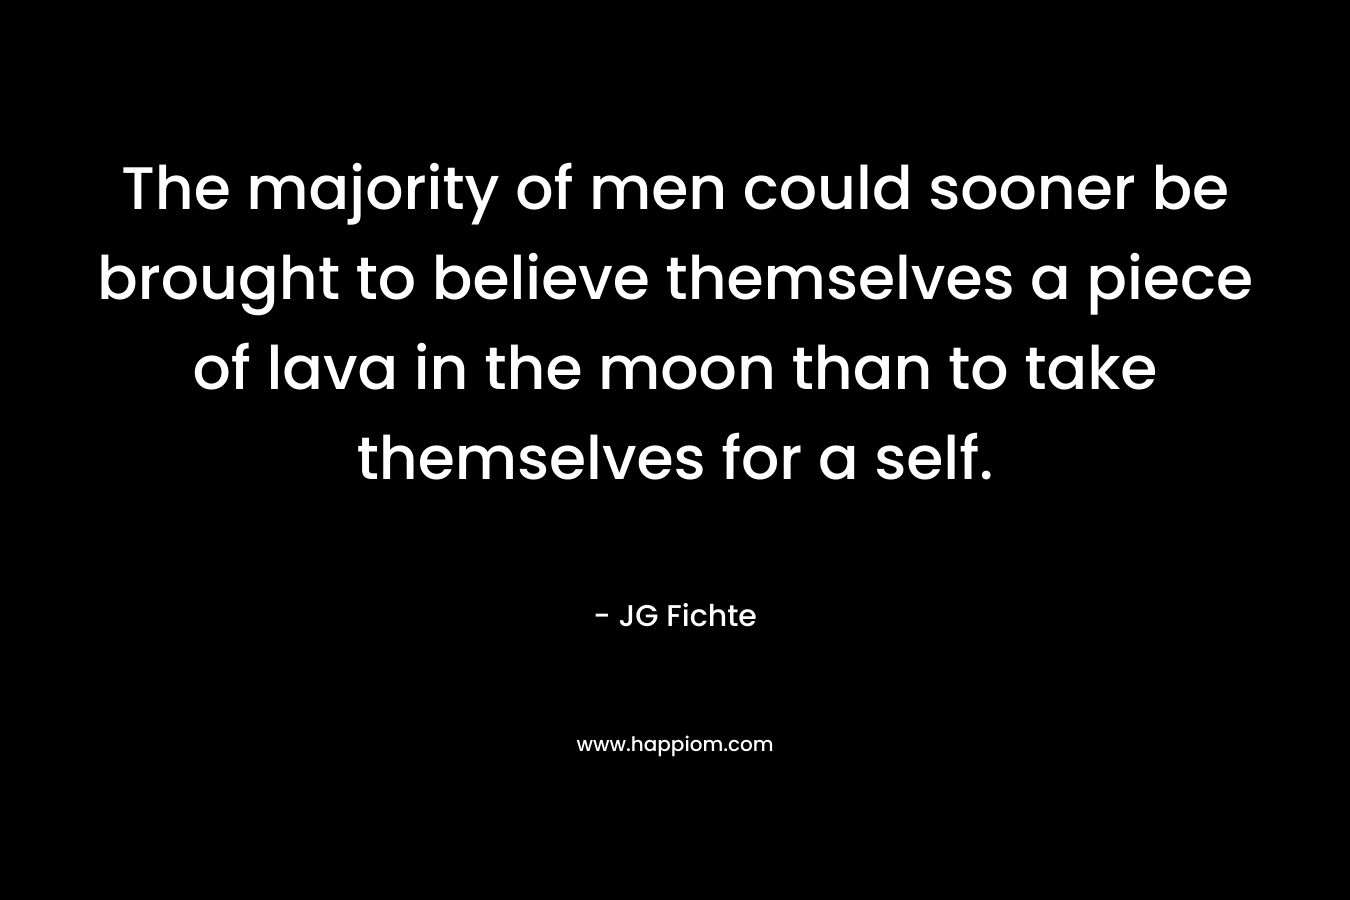 The majority of men could sooner be brought to believe themselves a piece of lava in the moon than to take themselves for a self.